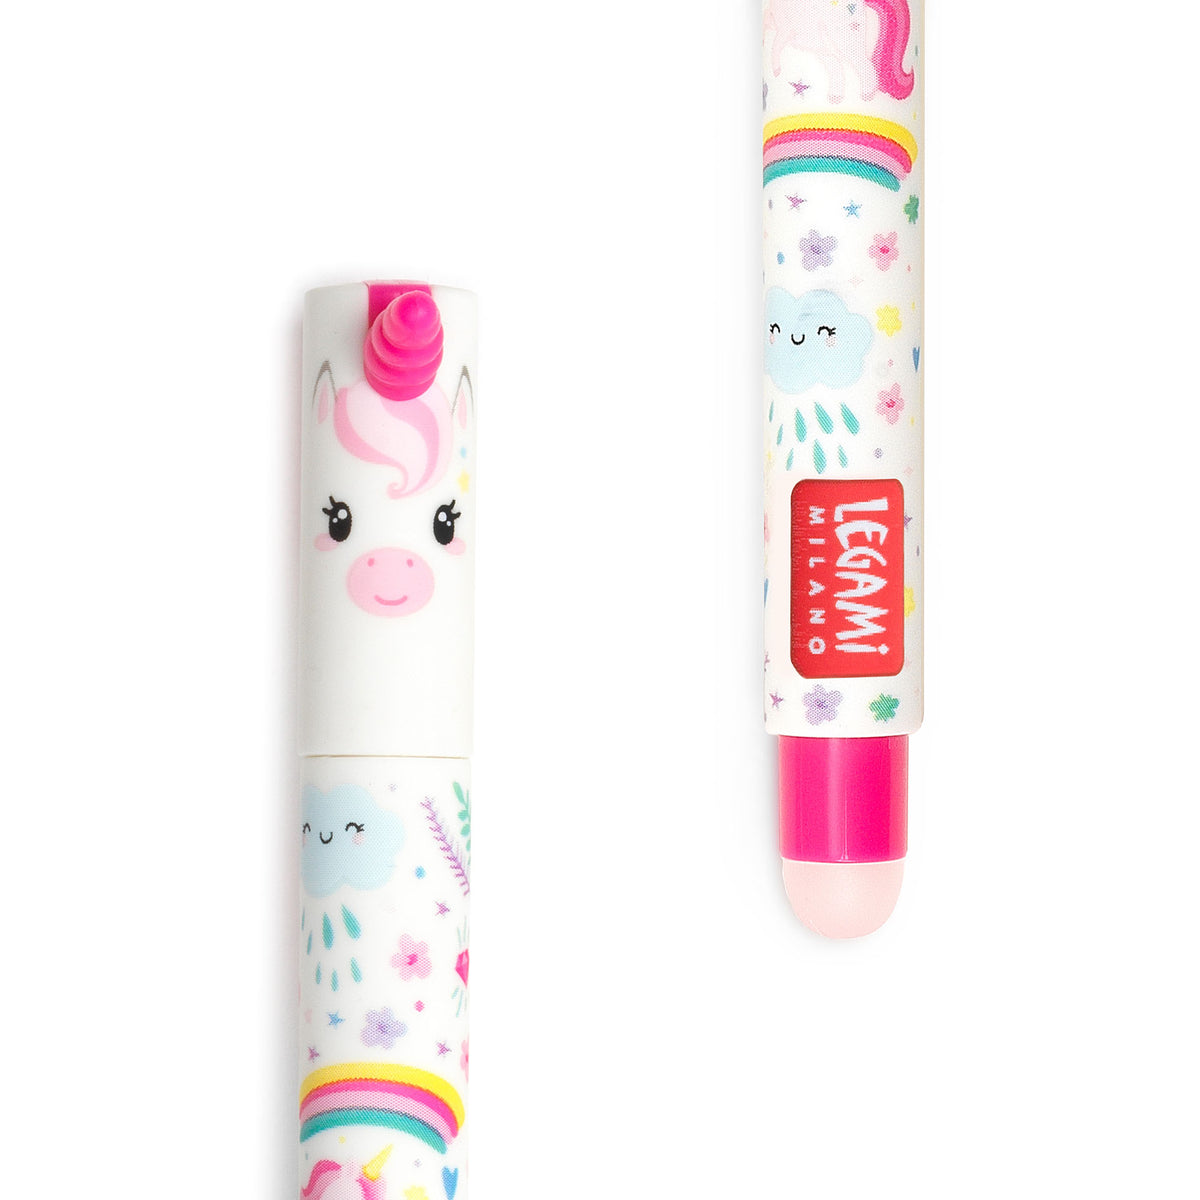 Image of an erasable pen lid and rubber in the shape of a unicorn.